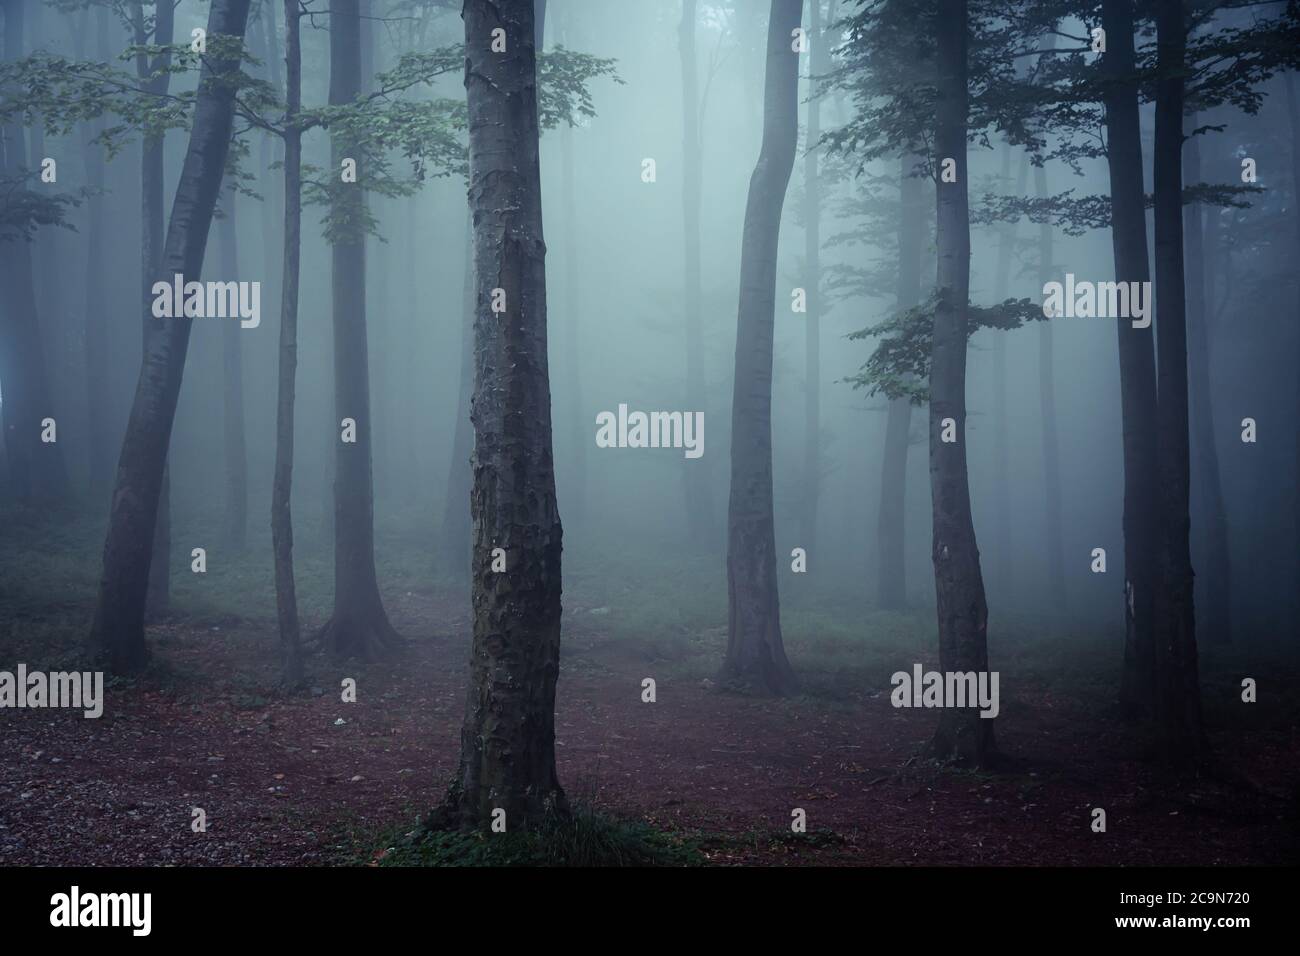 Forest landscape with tree trunks, green leaves, and deep mist, early in the morning. Stock Photo